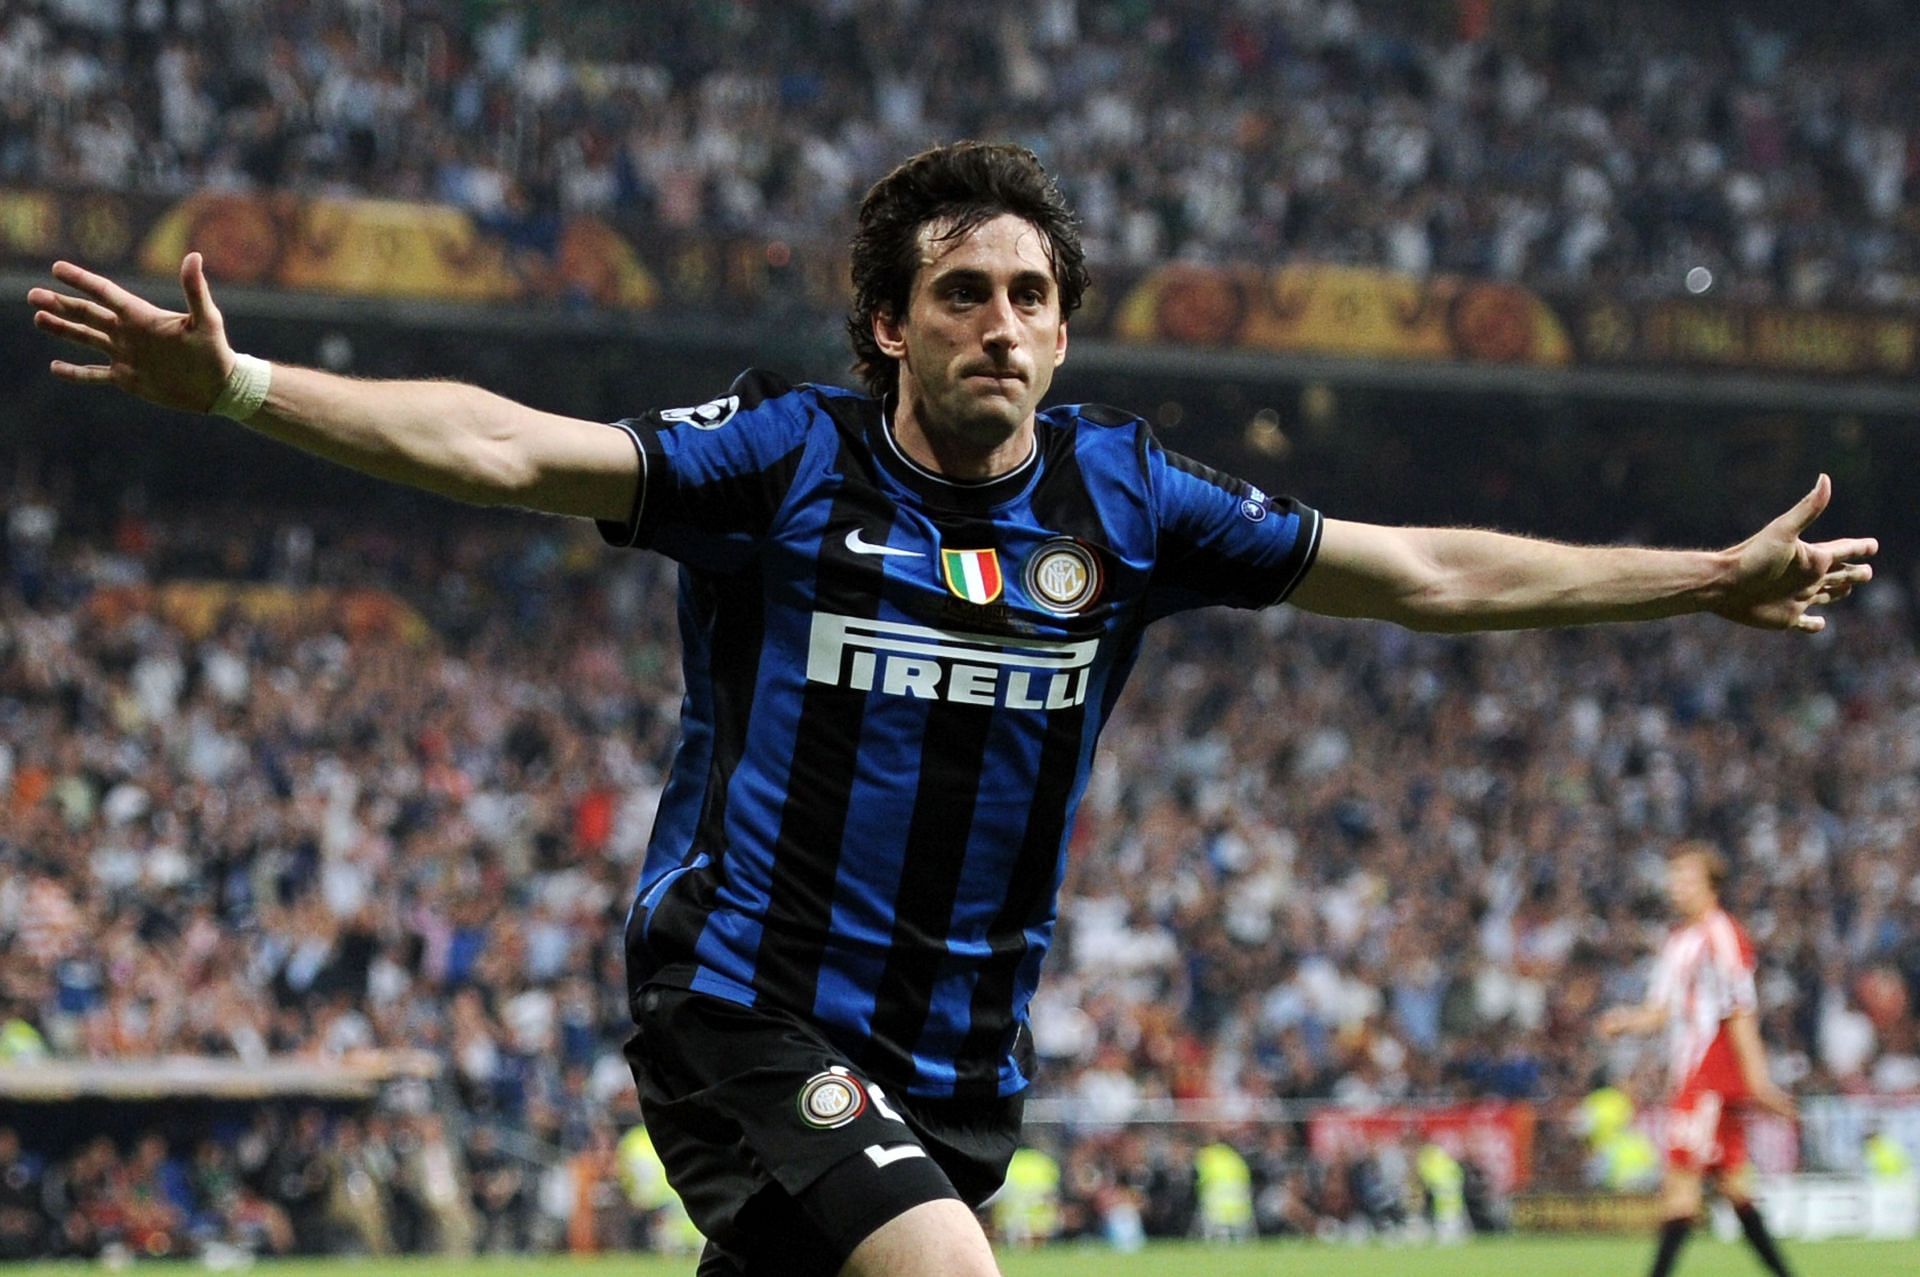 Diego Milito was a force to be reckoned with at Inter Milan.